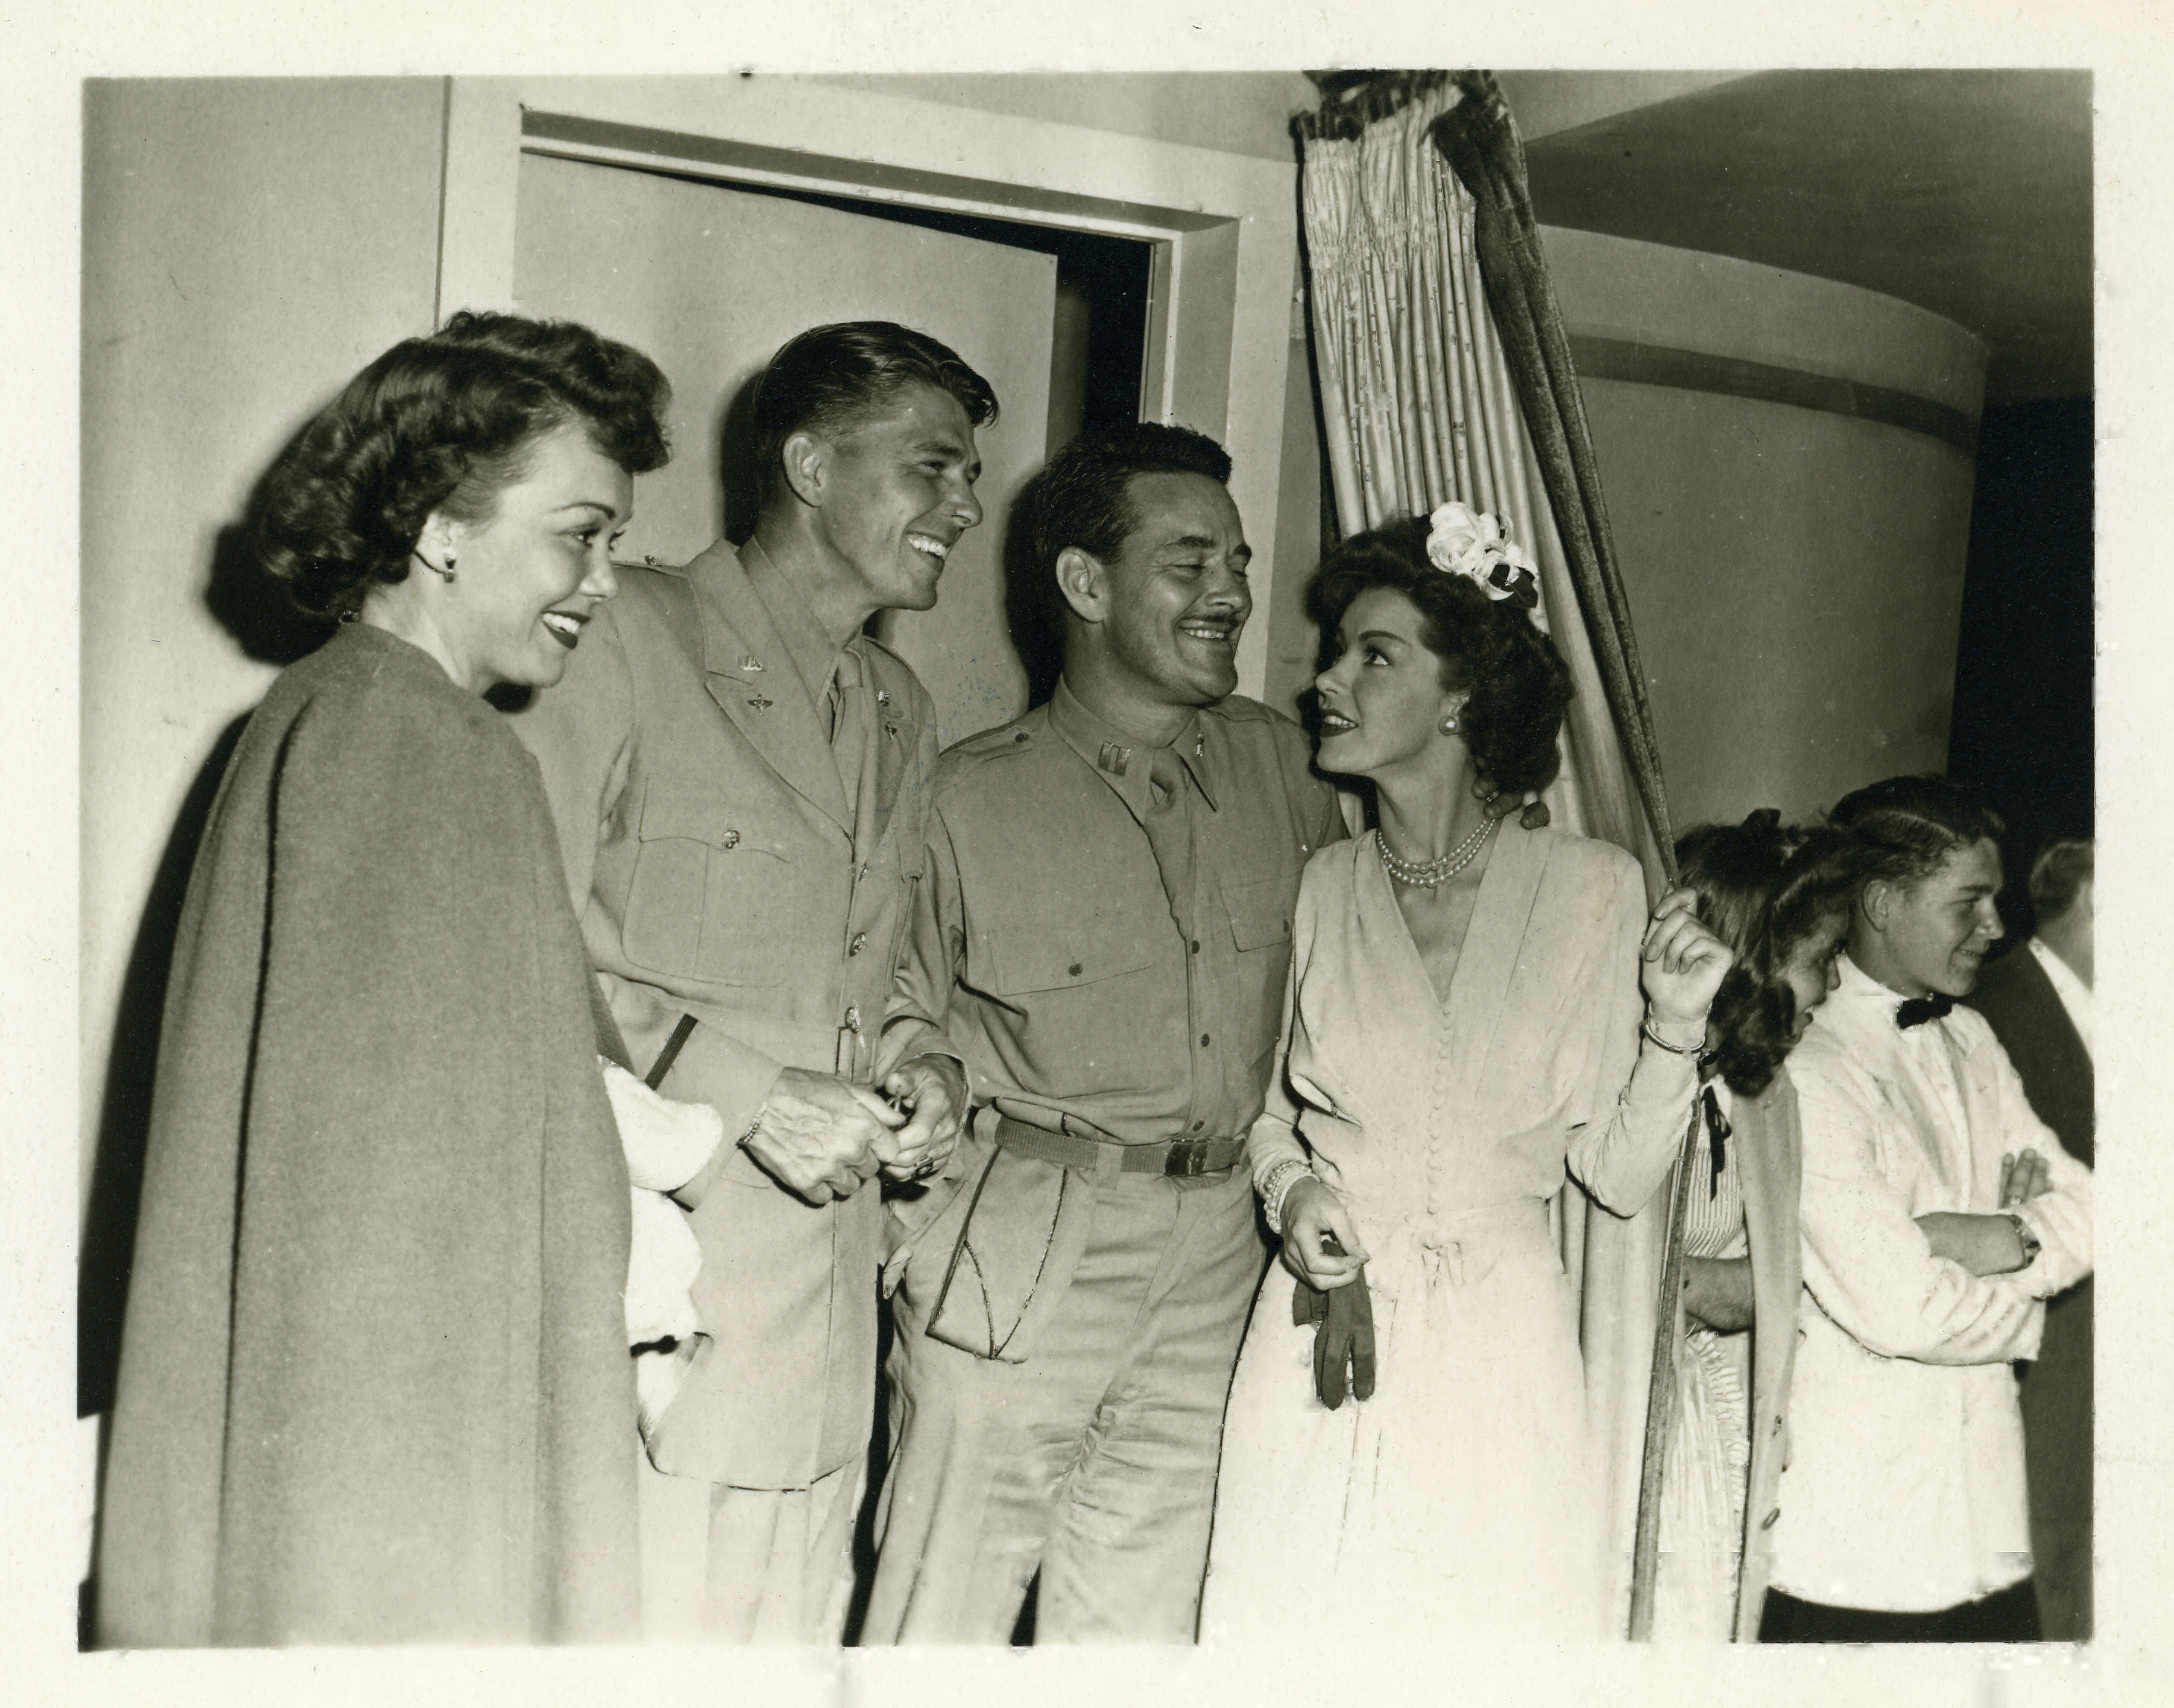 Ronald Reagan in US Army Air Force military uniform, Jane Wyman and unidentified couple, location unknown